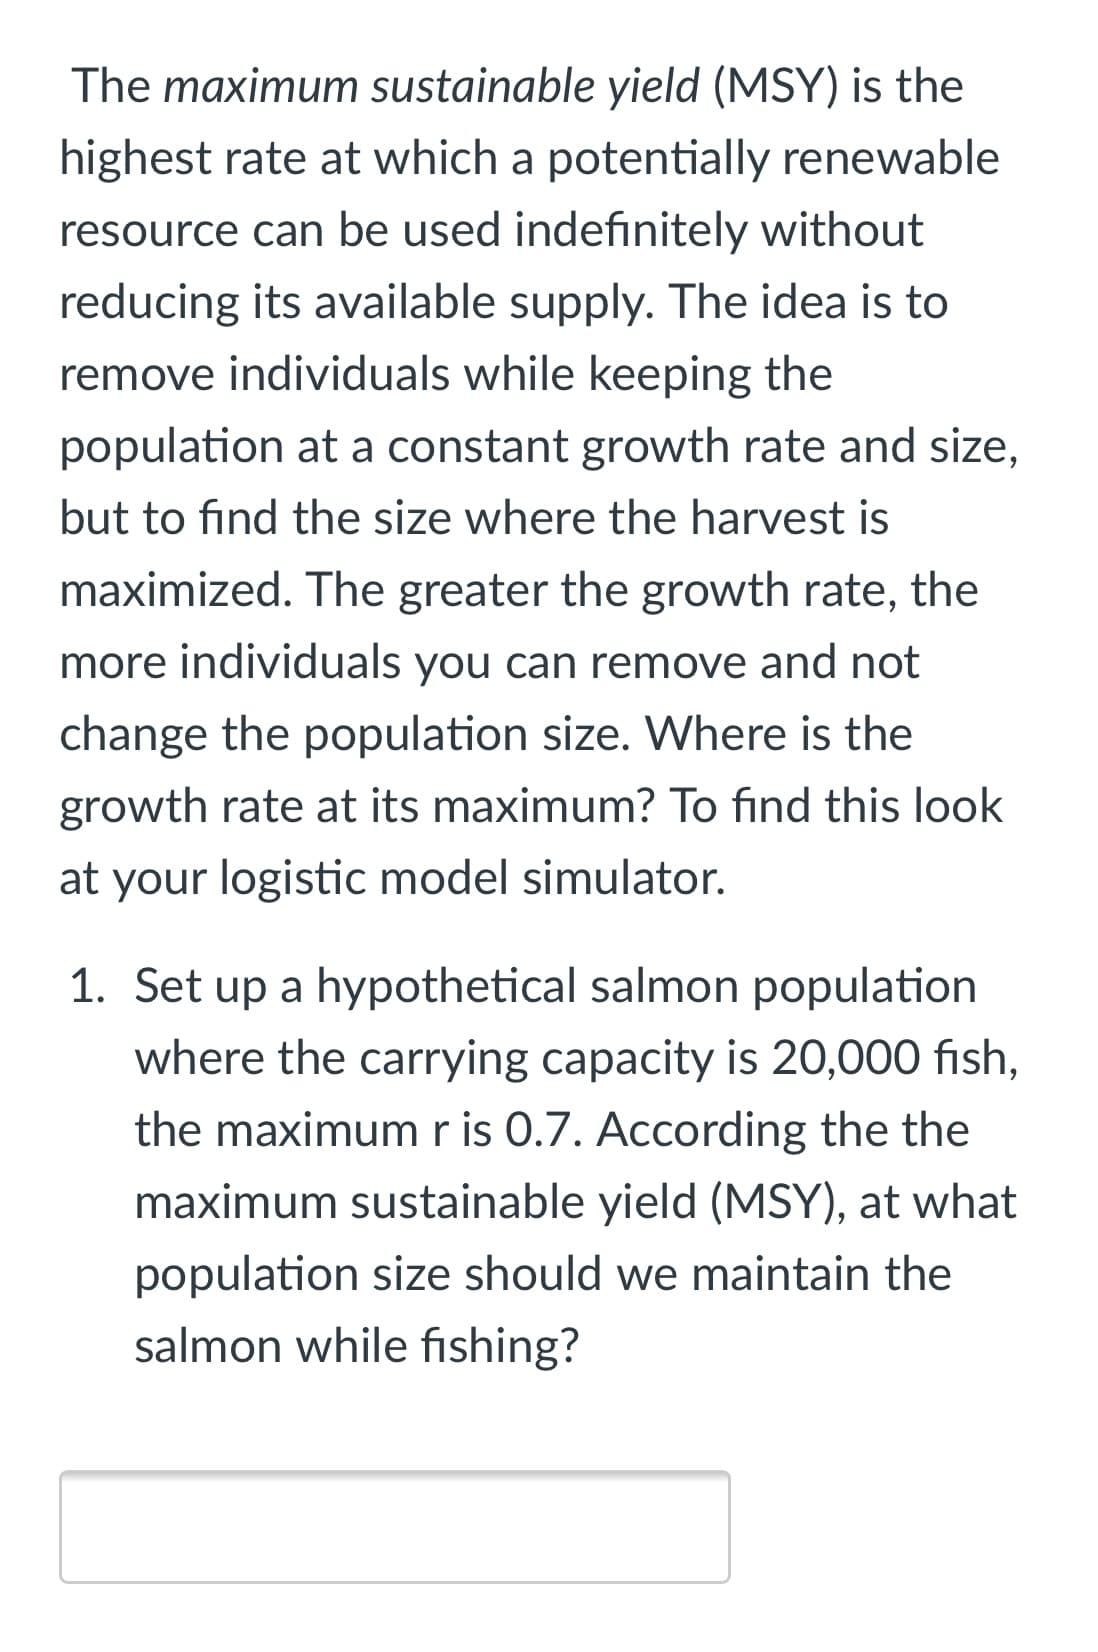 The maximum sustainable yield (MSY) is the
highest rate at which a potentially renewable
resource can be used indefinitely without
reducing its available supply. The idea is to
remove individuals while keeping the
population at a constant growth rate and size,
but to find the size where the harvest is
maximized. The greater the growth rate, the
more individuals you can remove and not
change the population size. Where is the
growth rate at its maximum? To find this look
at your logistic model simulator.
1. Set up a hypothetical salmon population
where the carrying capacity is 20,000 fish,
the maximumr is 0.7. According the the
maximum sustainable yield (MSY), at what
population size should we maintain the
salmon while fishing?
